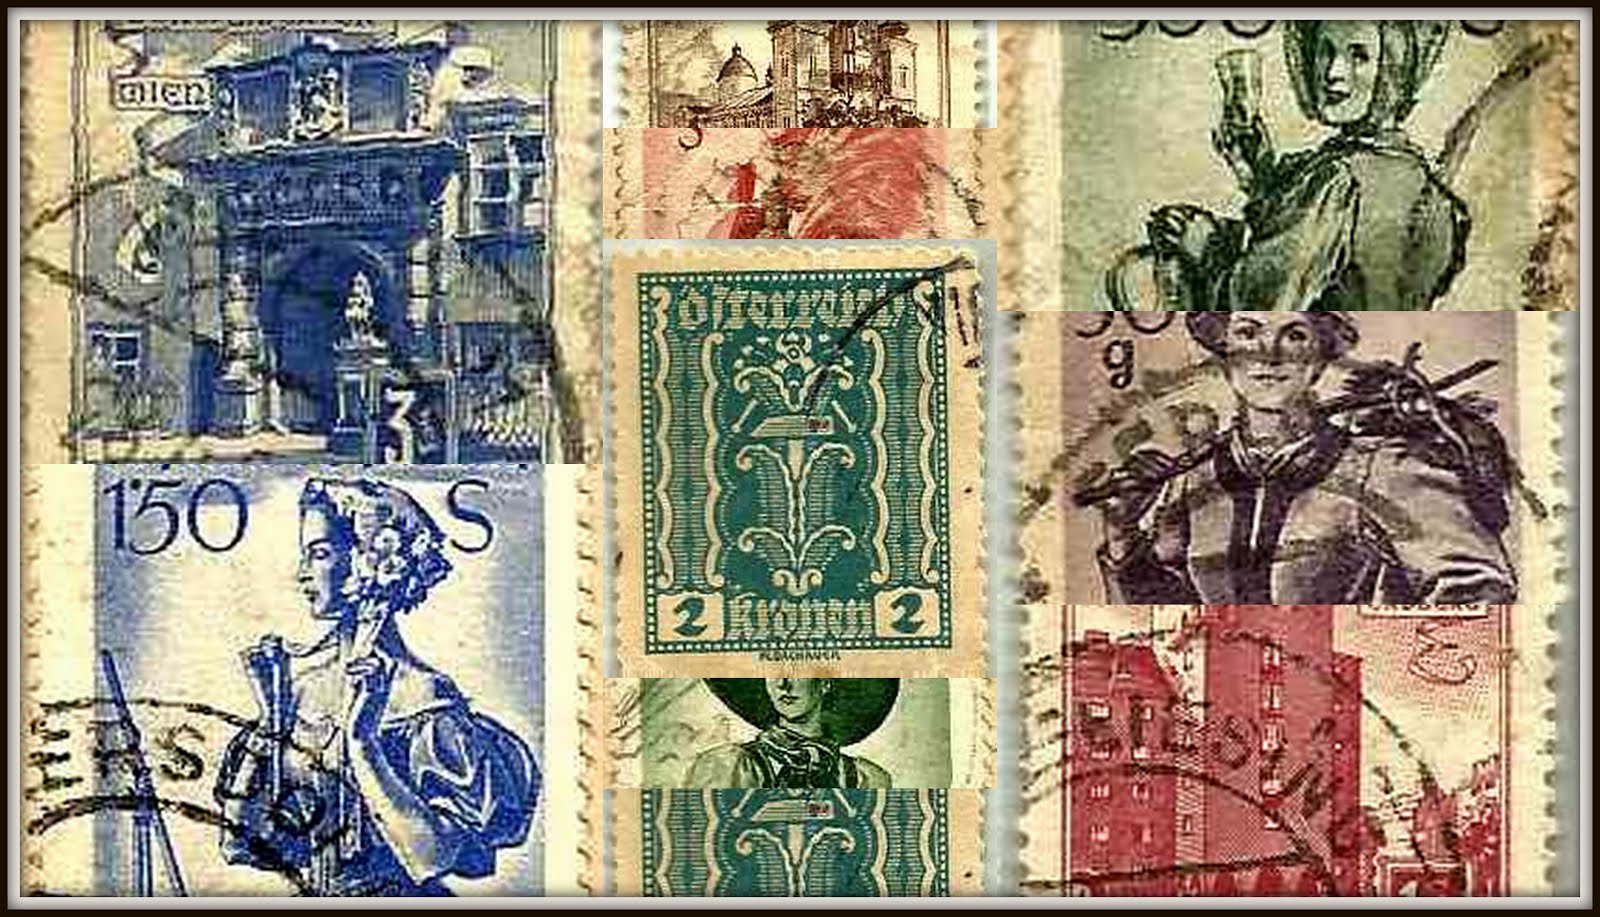 My Stamps of Austria